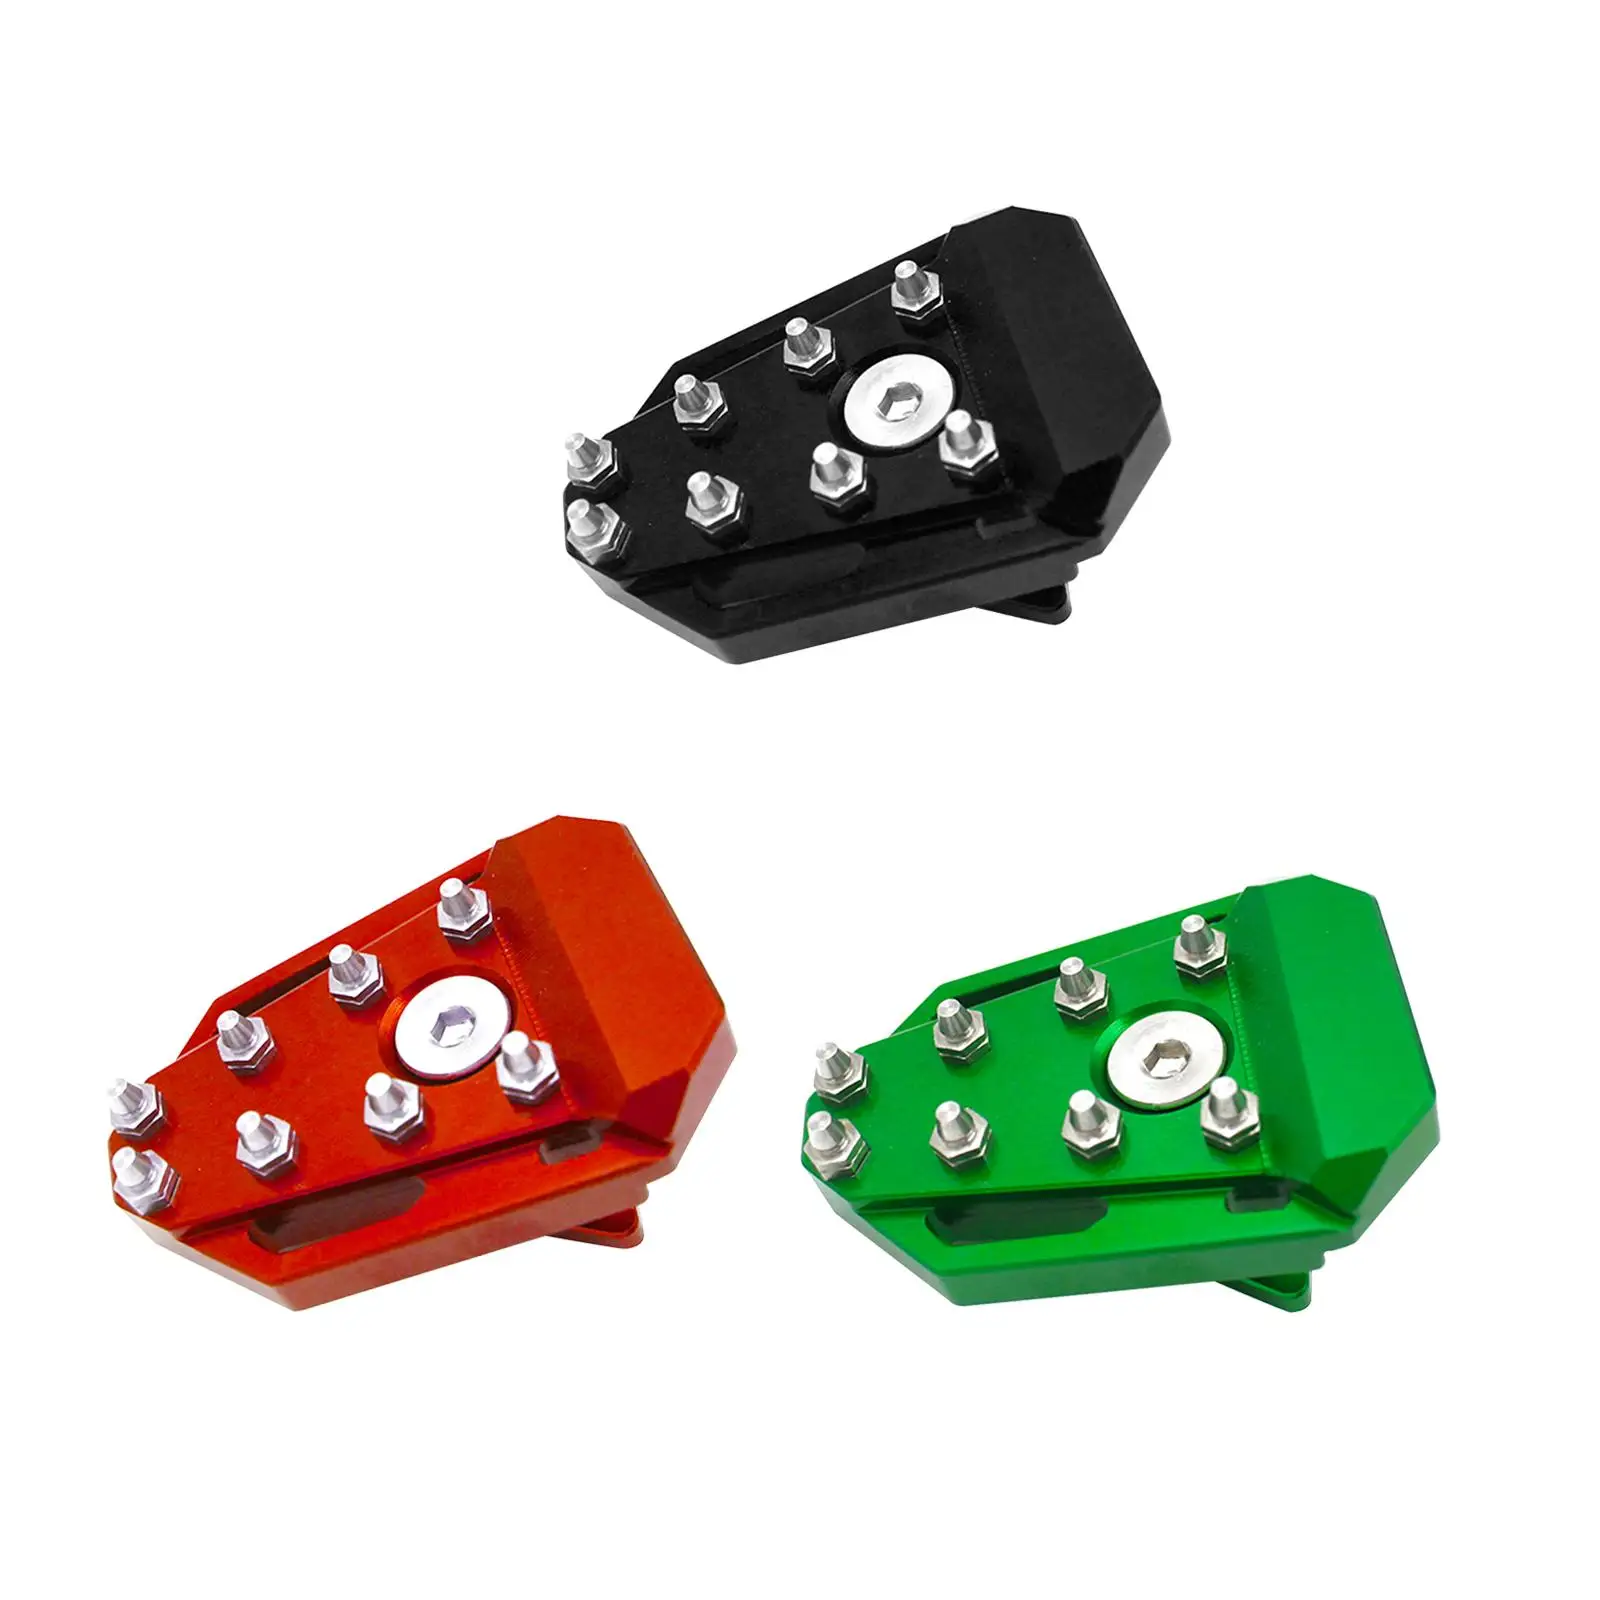 Brake Pedal Footboard Tip Extension Pad Durable for Klr650 Easy Install - $15.96